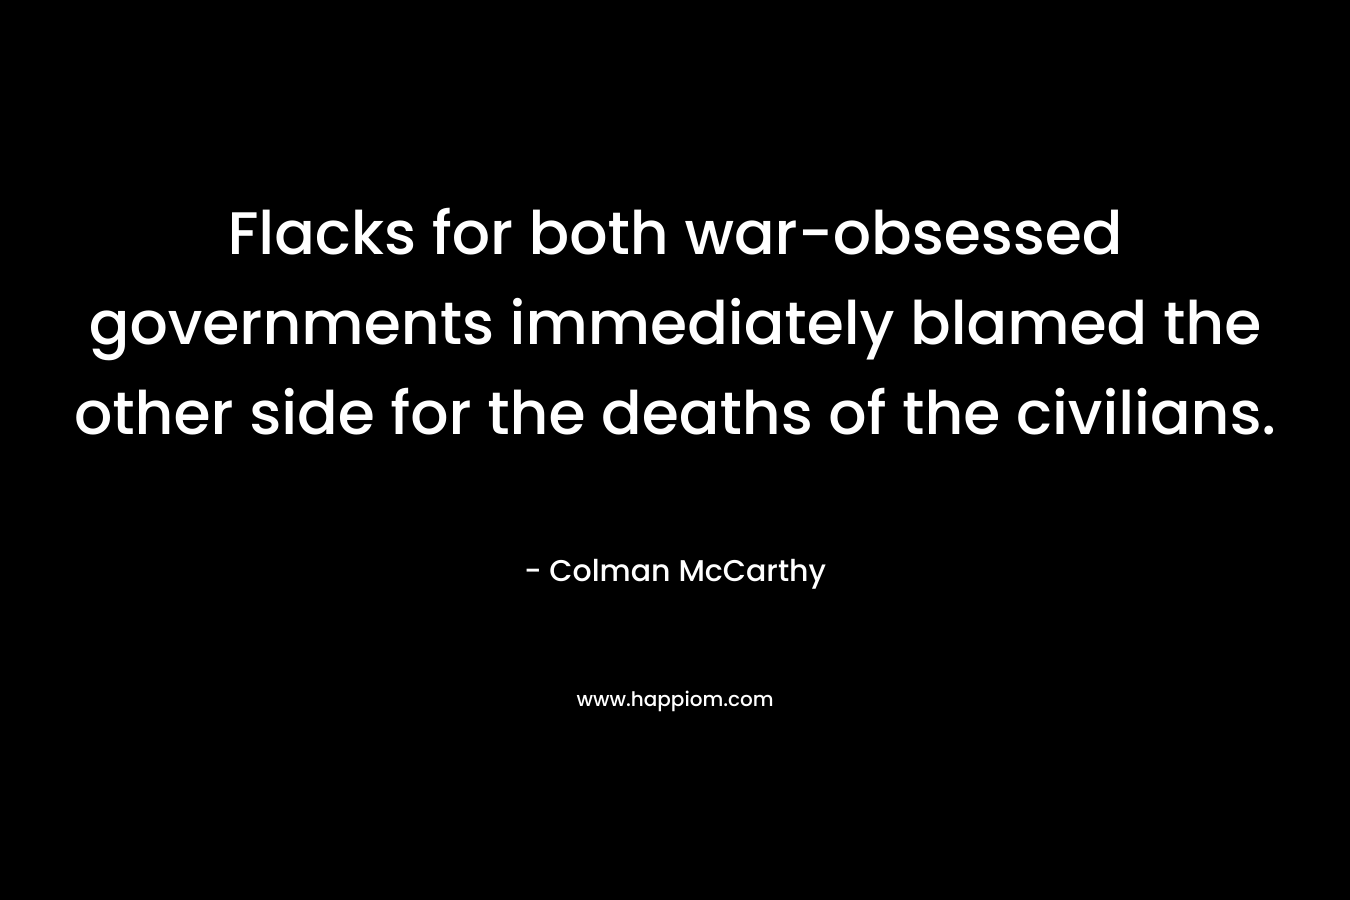 Flacks for both war-obsessed governments immediately blamed the other side for the deaths of the civilians.